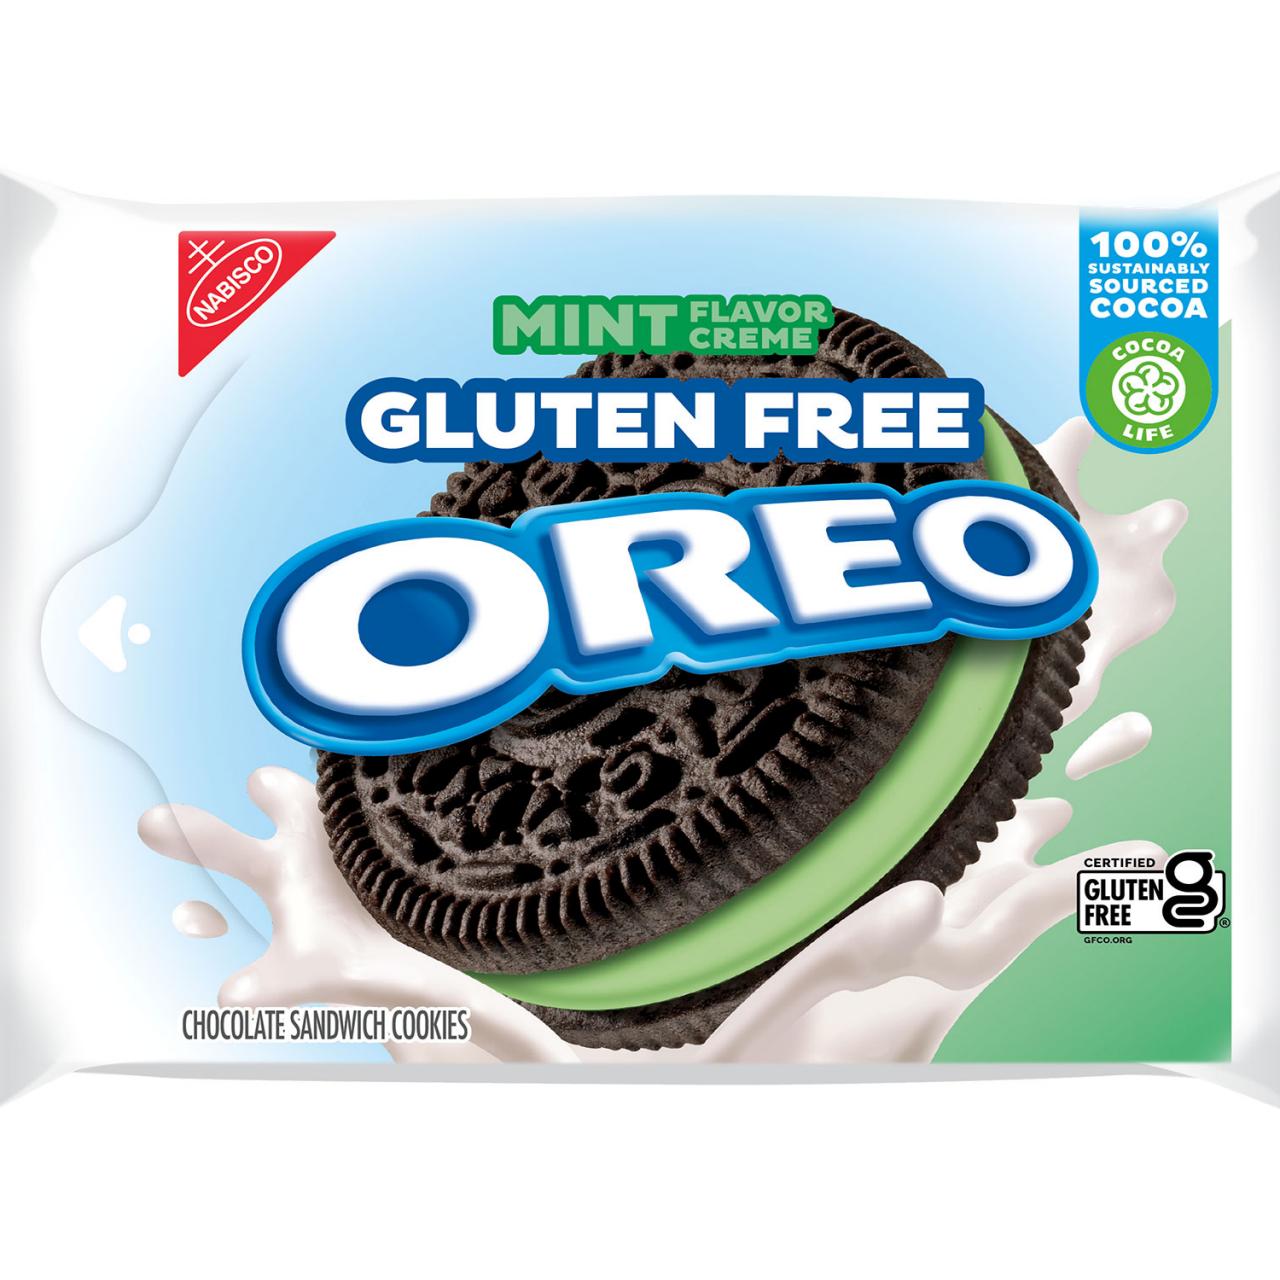 Oreo Just Launched a Brand-New, Out-of-This-World Flavor